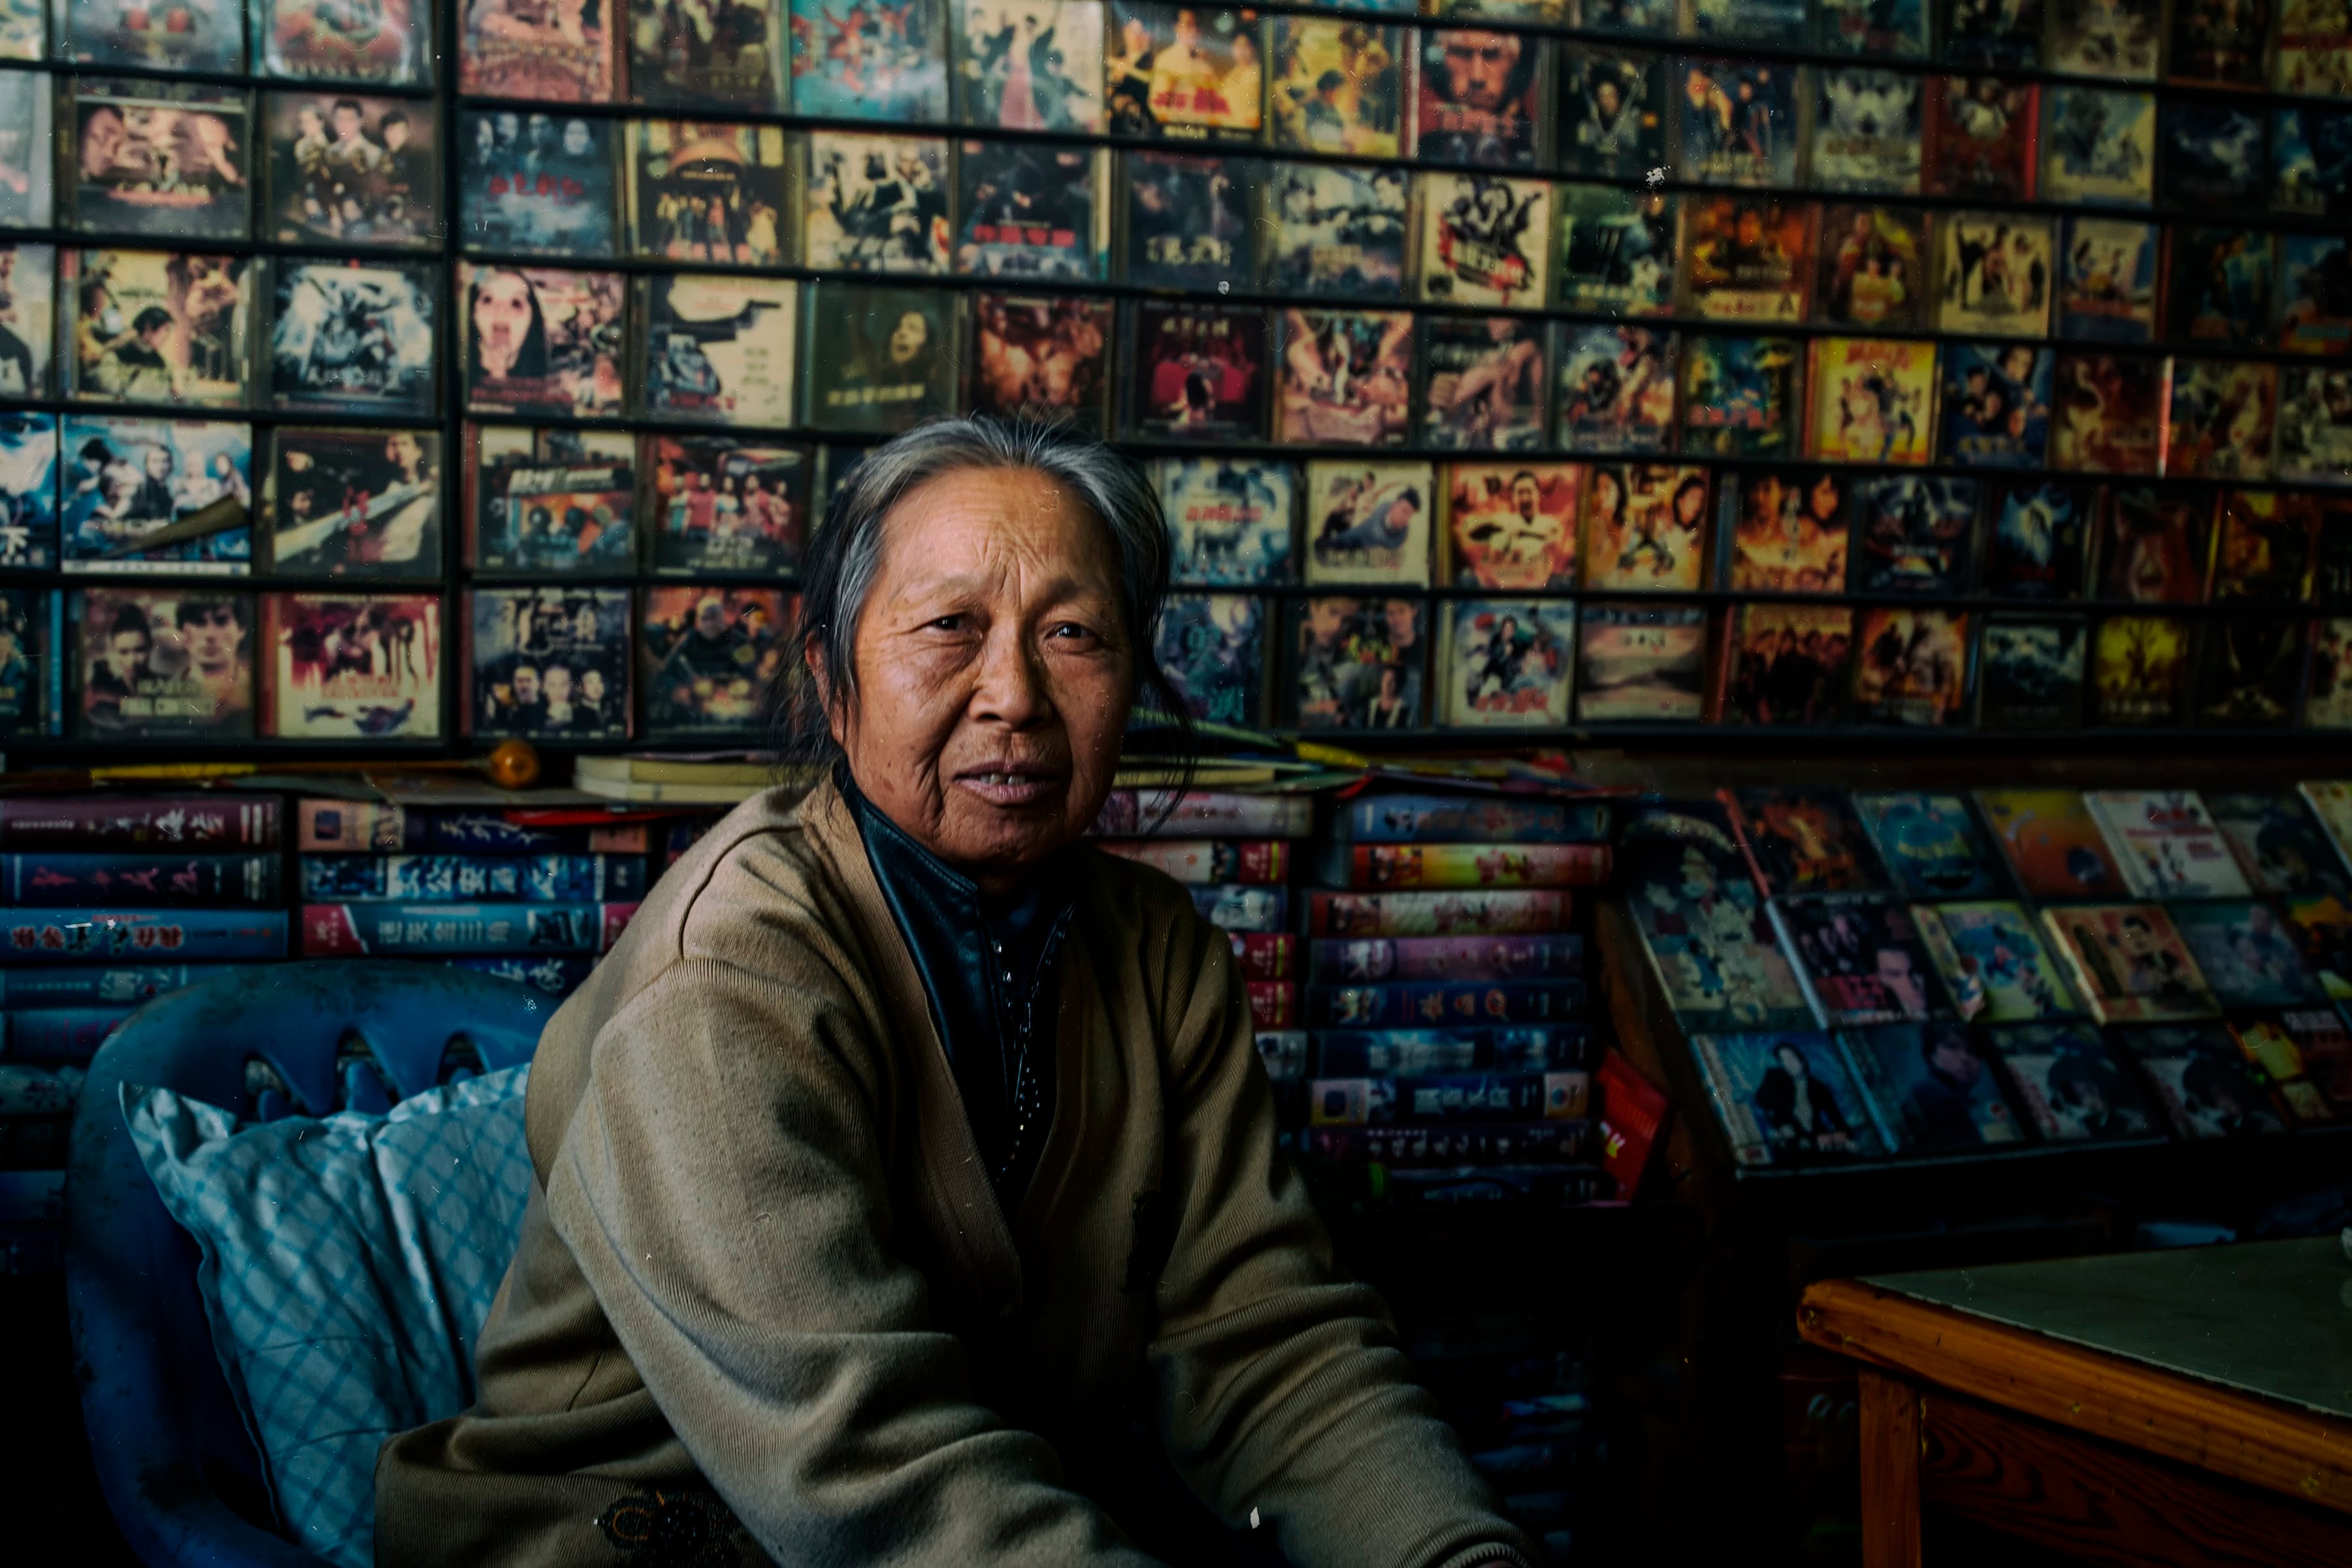 This woman manages a video parlor in India. She started the business with a government loan and has grown ever since. Photo: Joydeep Mukherjee, 2017 CGAP Photo Contest